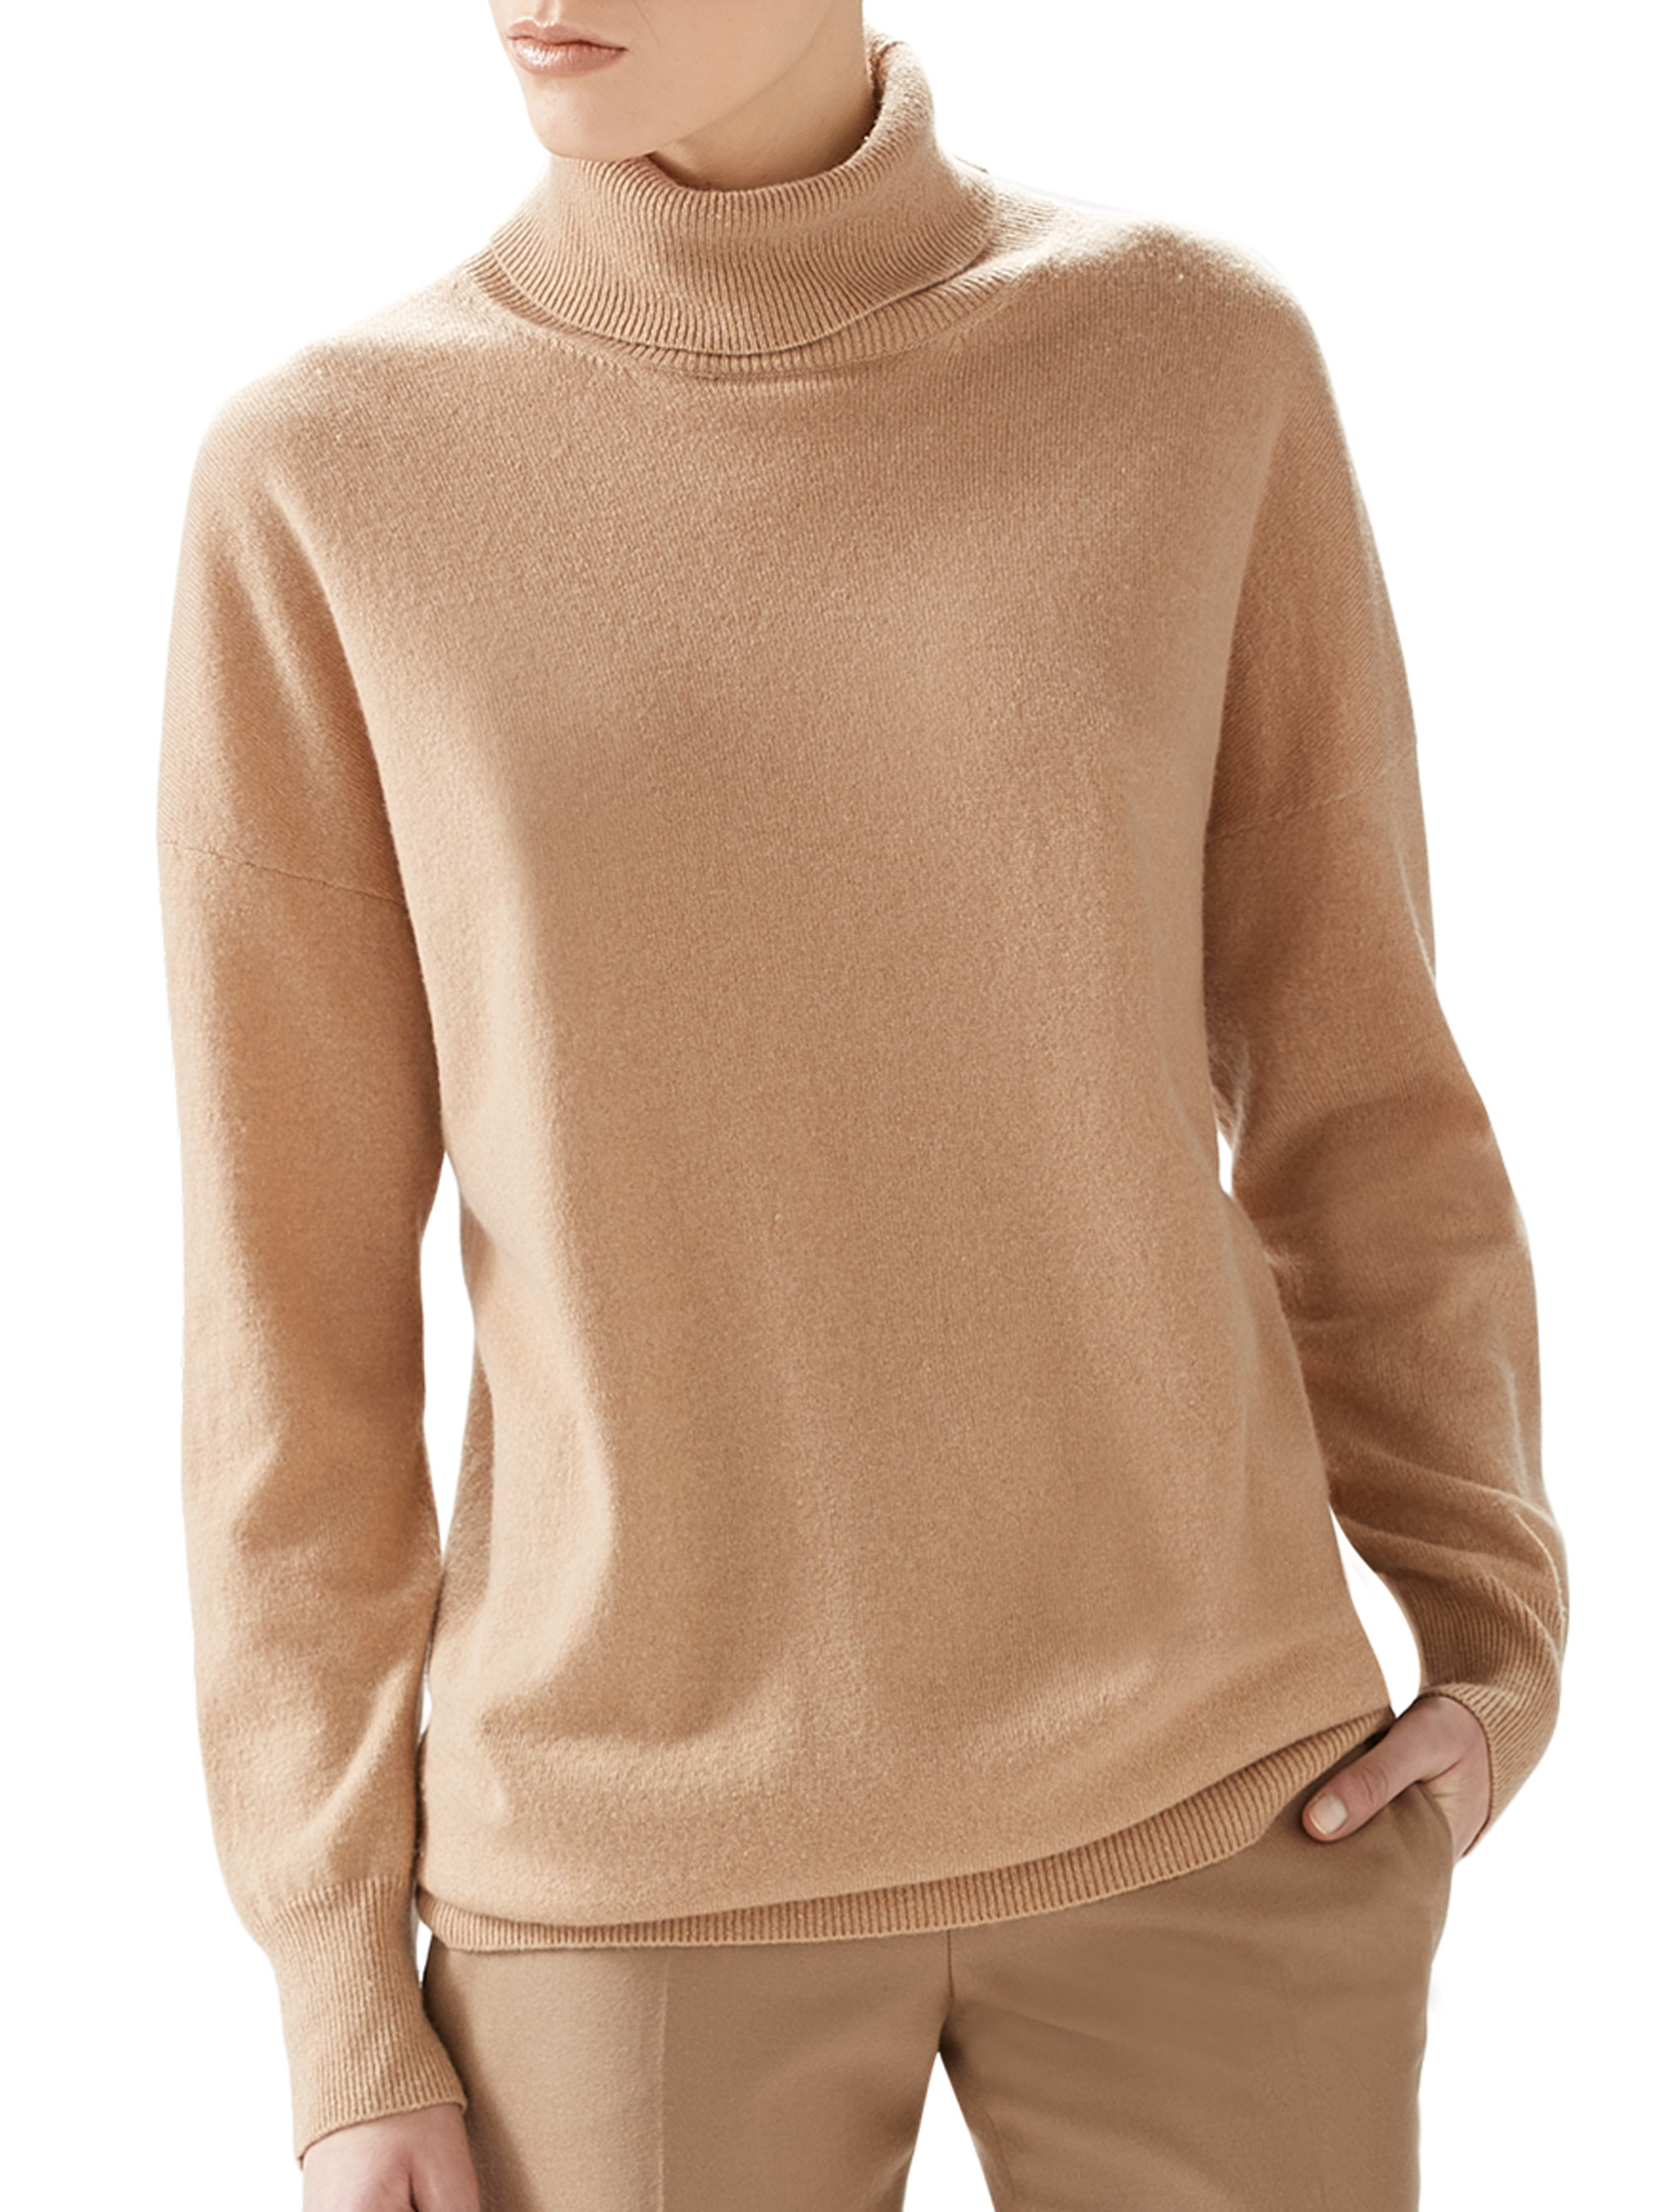 Gucci Oversized Cashmere Turtleneck Sweater in Natural | Lyst